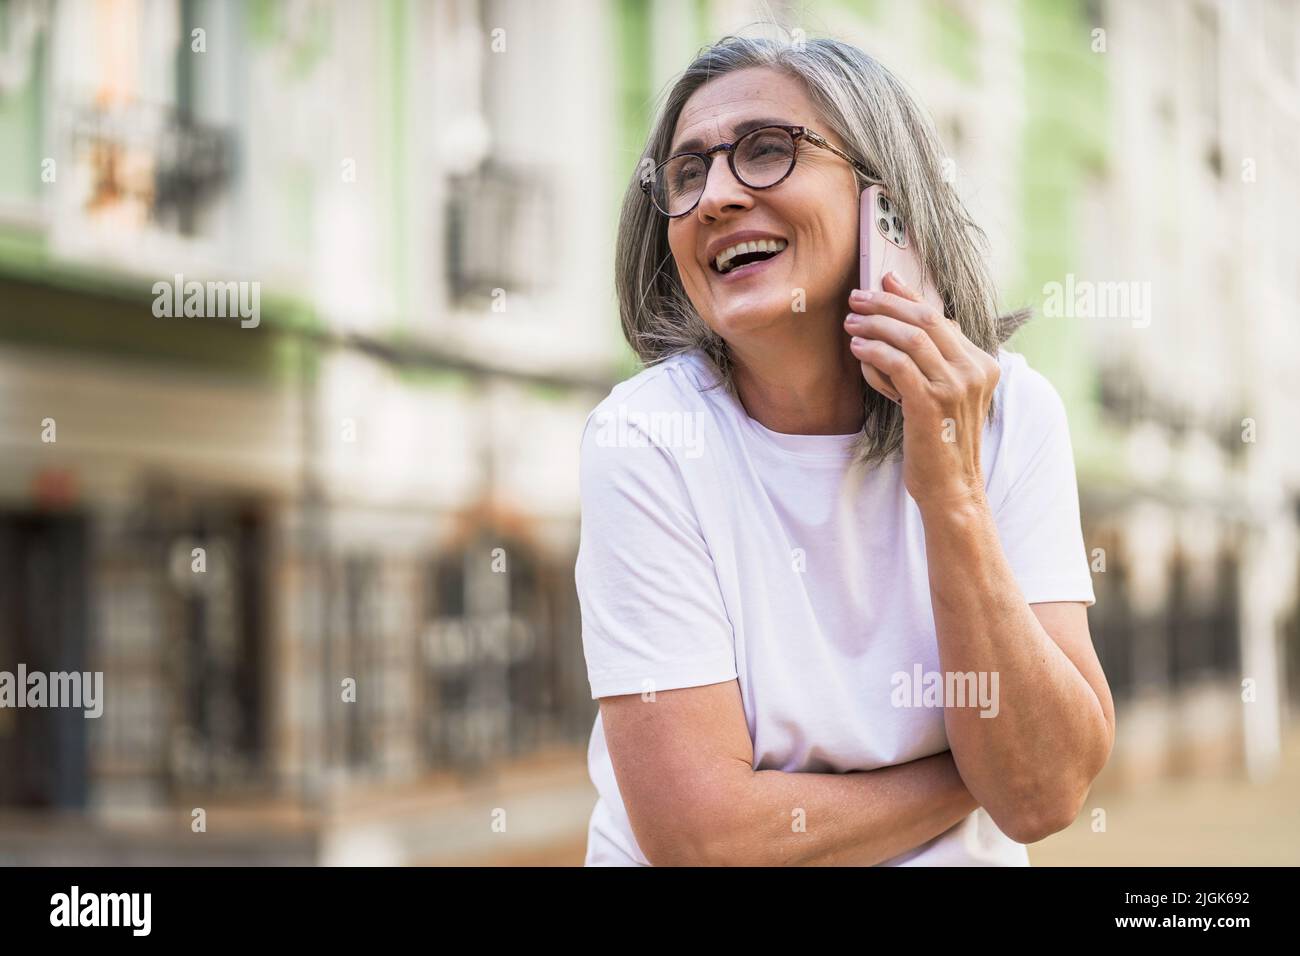 Charming mature business woman with grey hair talking on the phone holding smartphone standing outdoors of the streets of old urban city wearing white t-shirt. Silver hair woman outdoors.  Stock Photo